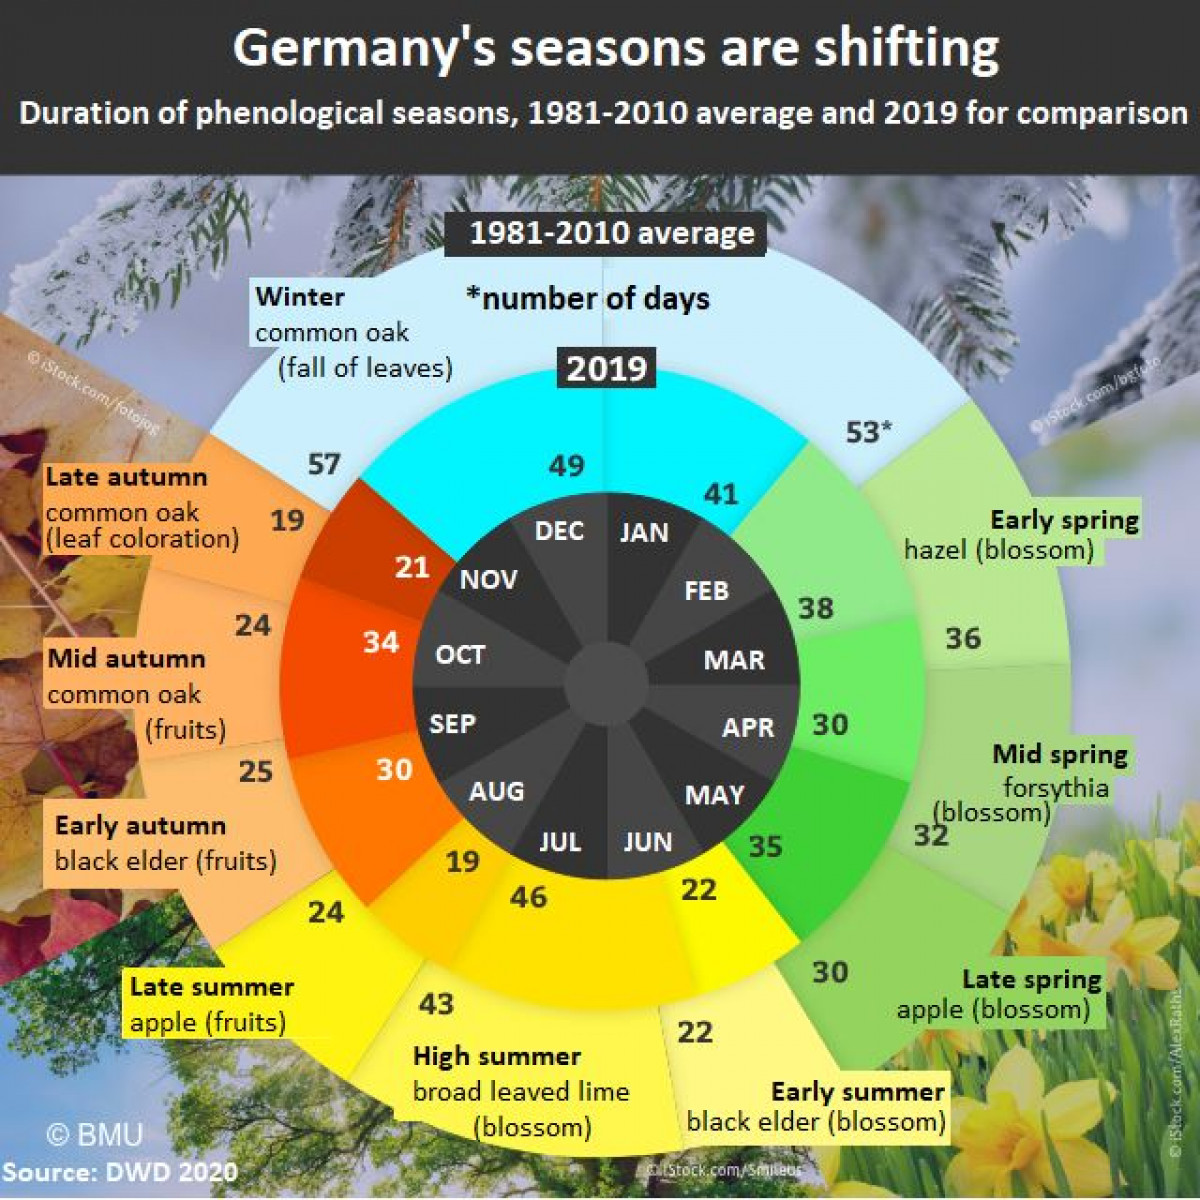 Seasons in Germany shifting to shorter winters, earlier summers Clean